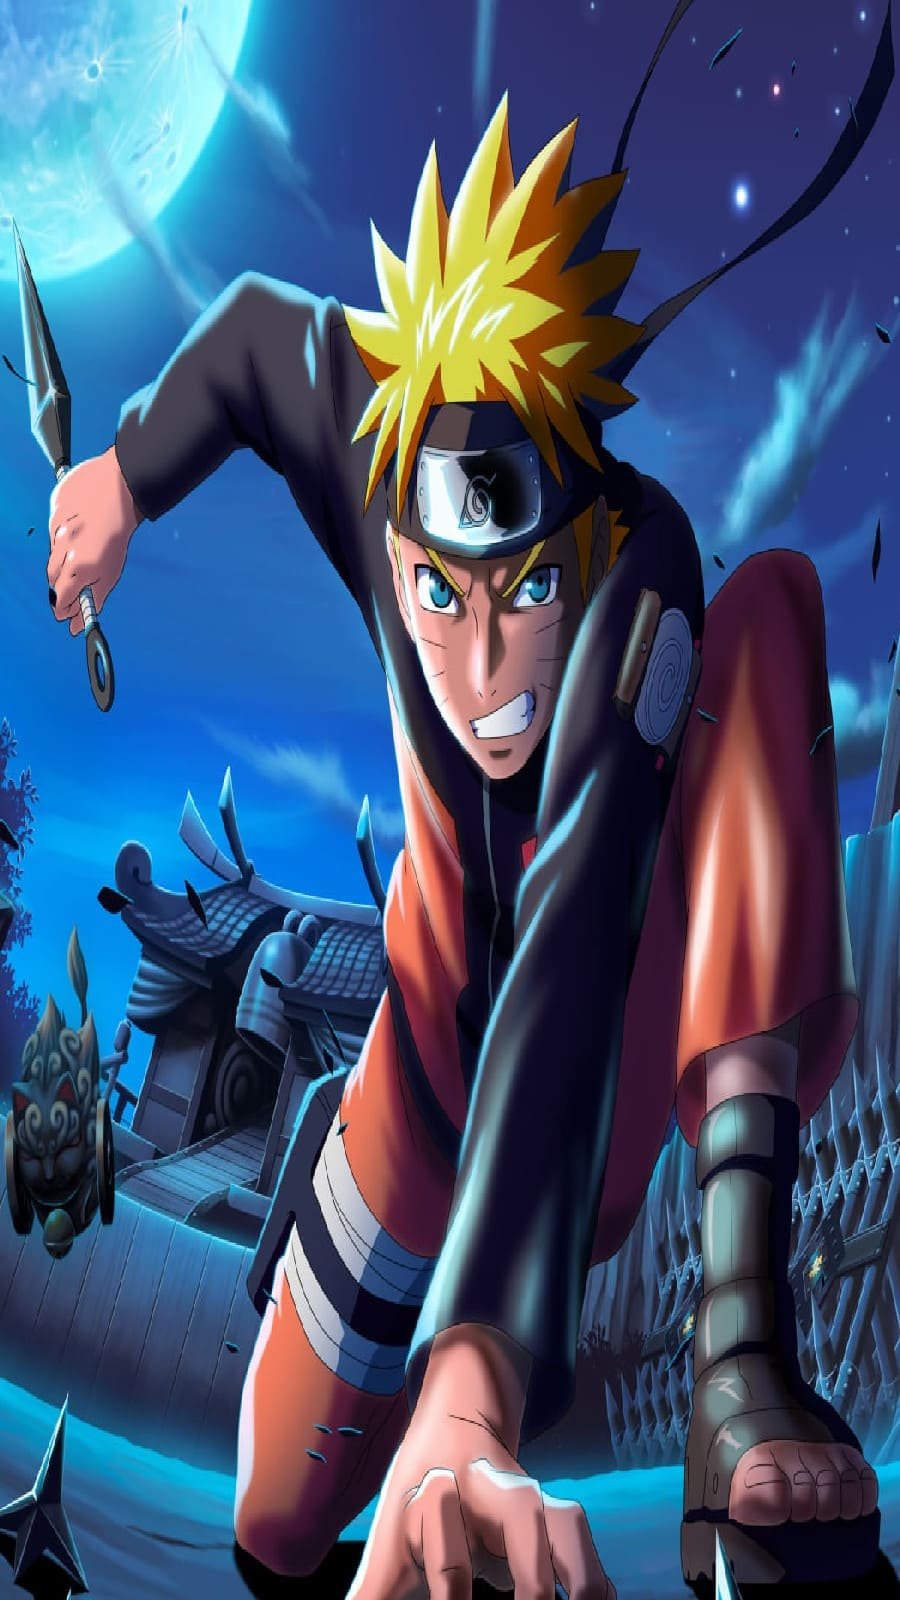 Awesome Naruto iPhone Wallpaper 4k from Naruto Shippuden Anime 19